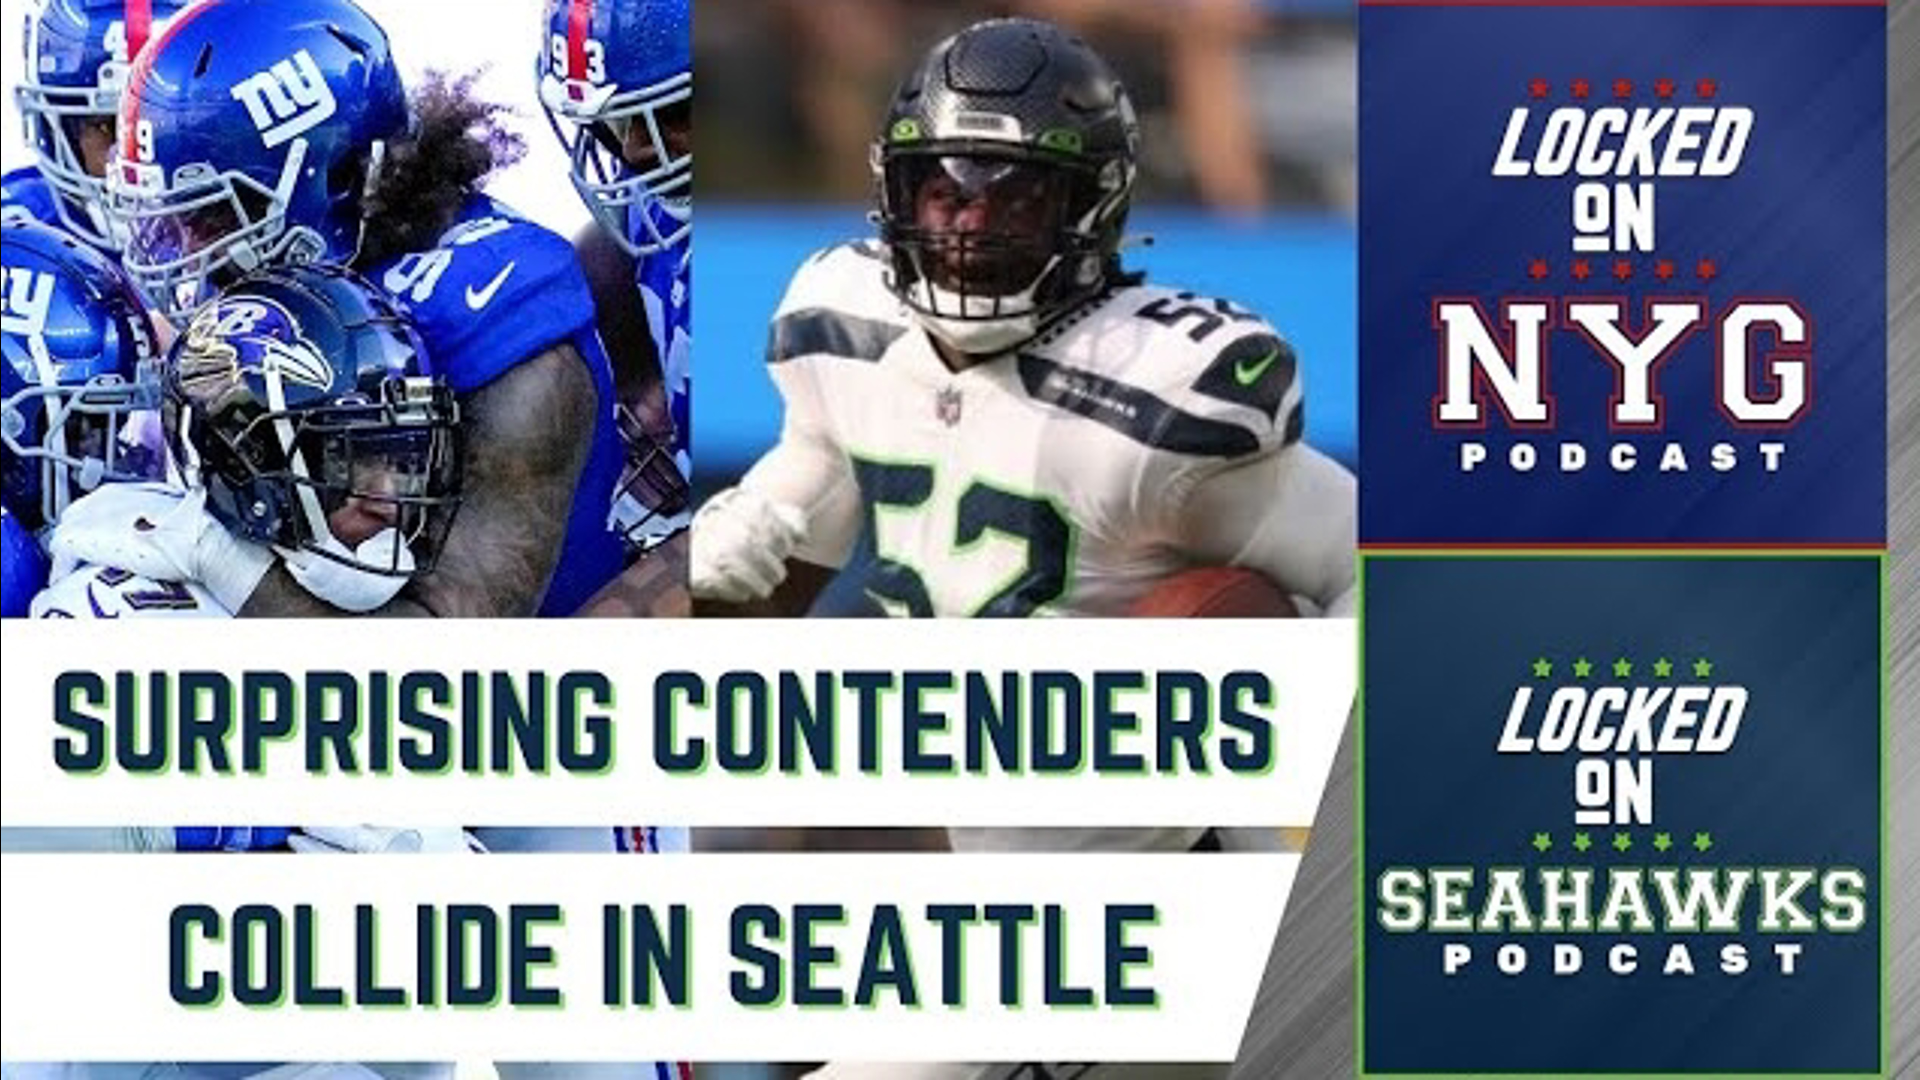 Corbin Smith and Locked On Giants host Patricia Traina discuss the paths both teams have traveled to emerge as pleasant surprises in the first half of the season.